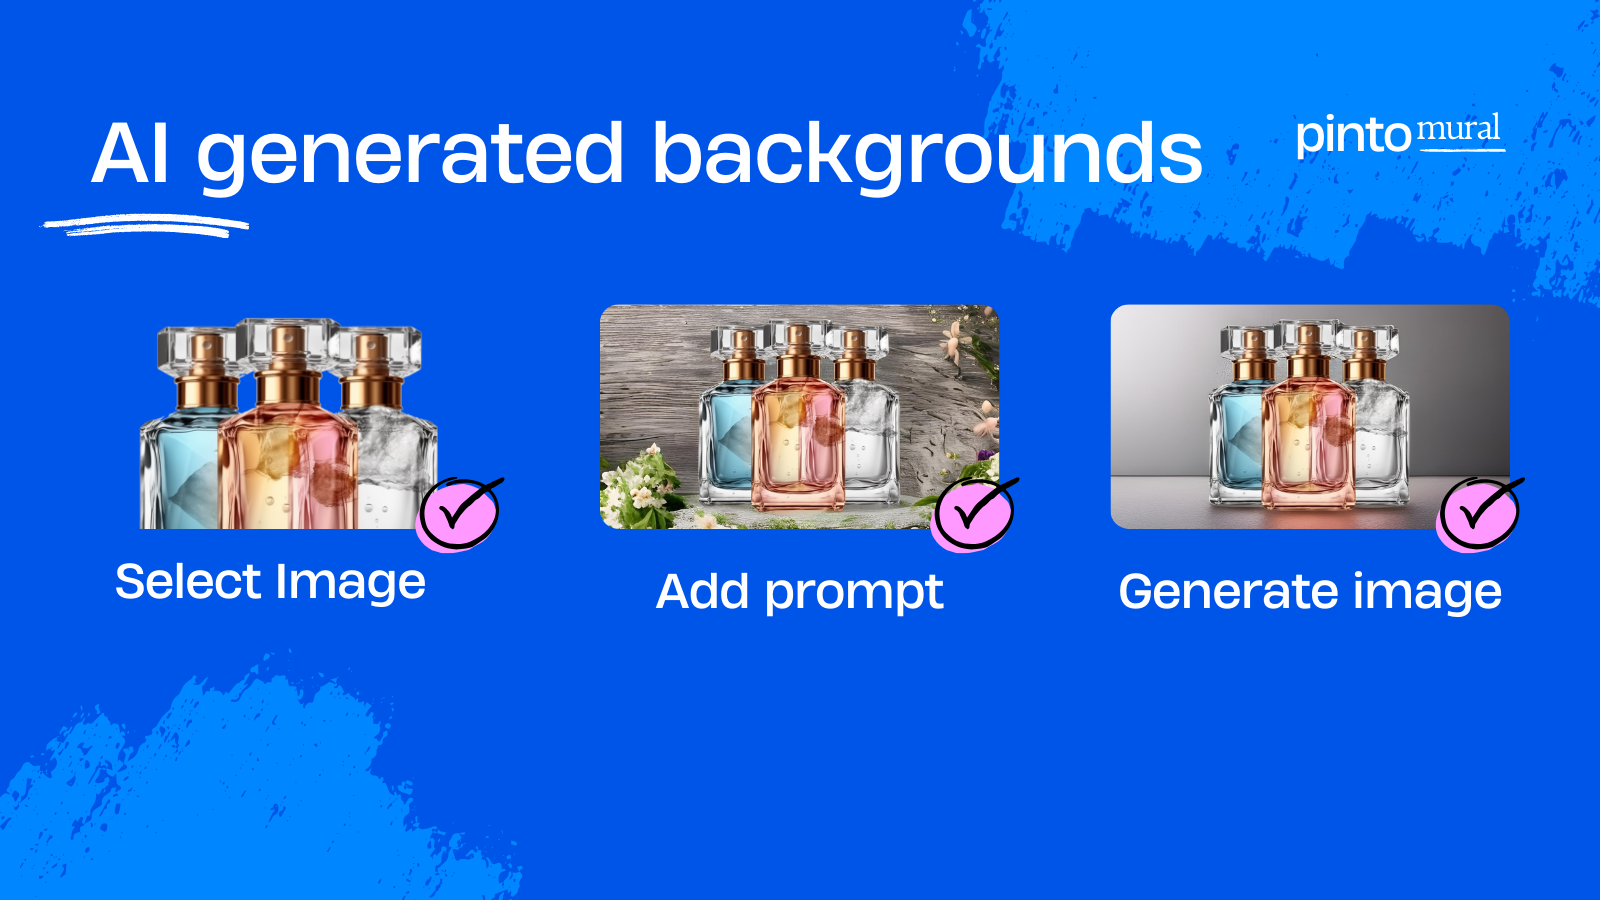 Generate backgrounds for your products using AI